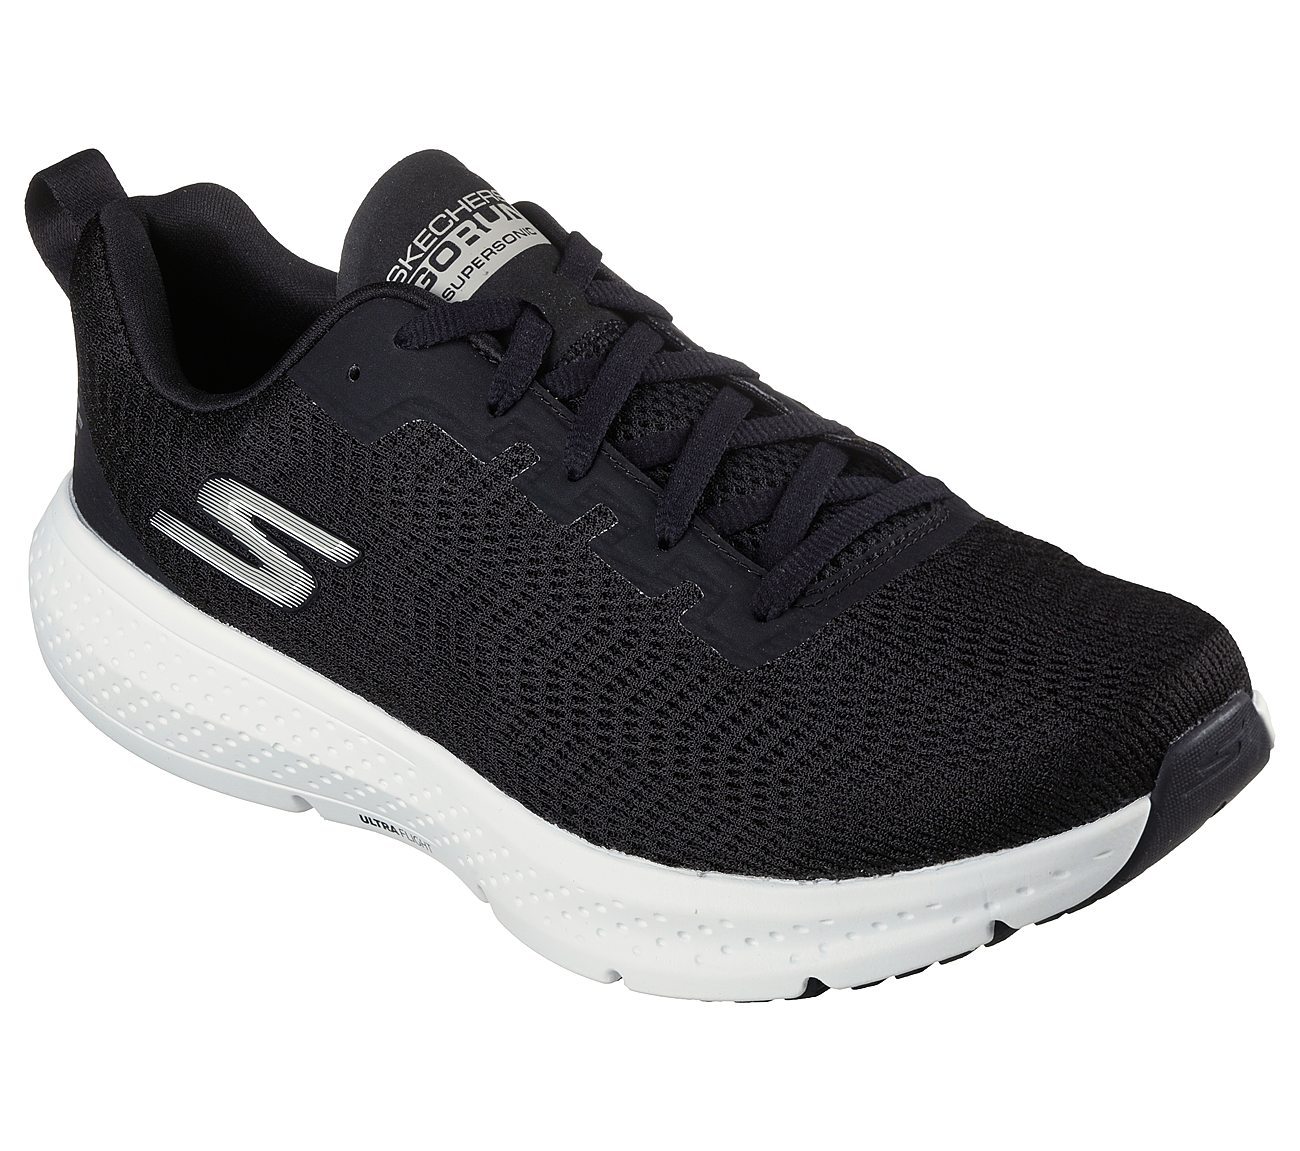 GO RUN SUPERSONIC, BLACK/WHITE Footwear Lateral View